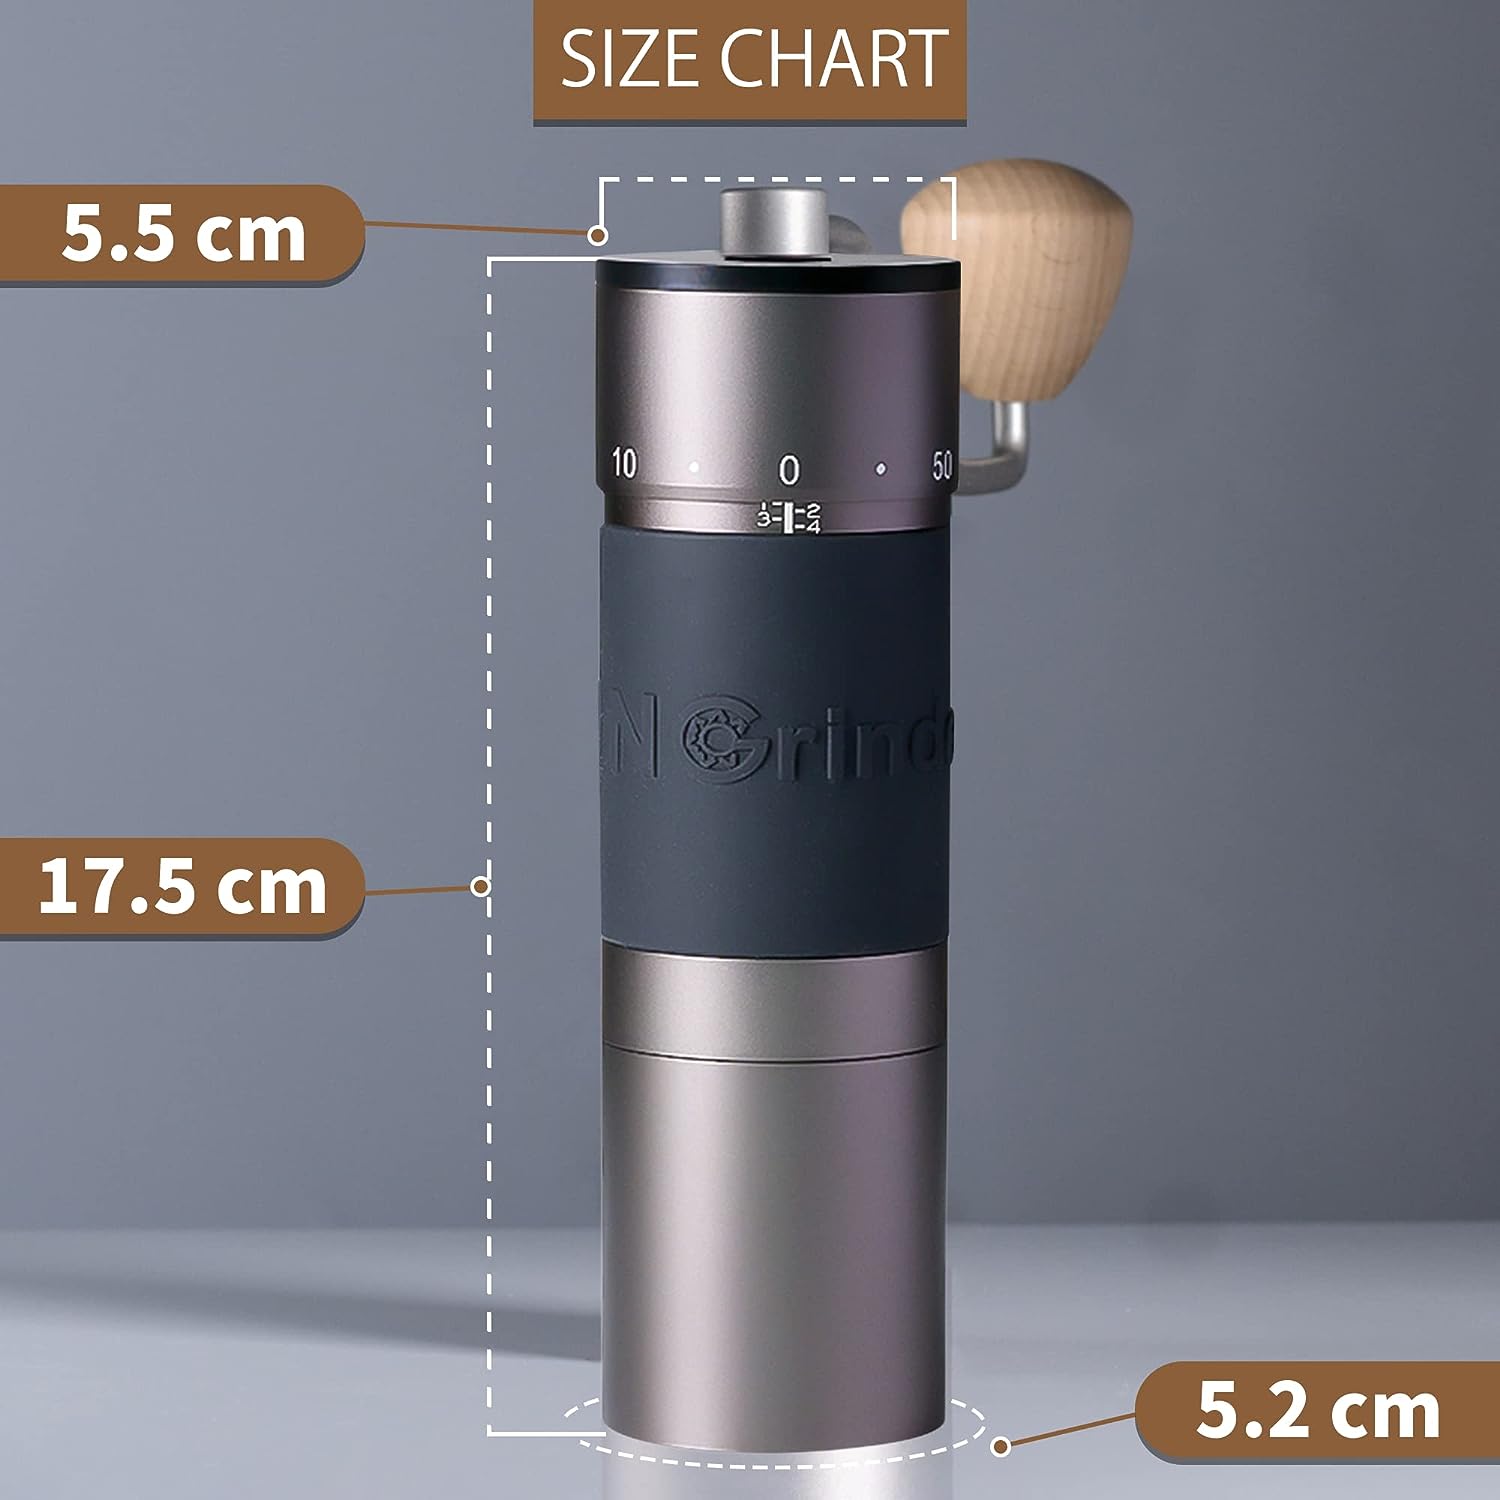 KINGrinder K 4 Iron Grey Manual Hand Coffee Grinder 240 Adjustable Grinding Levels for Aeropress, French Press, Drip Coffee, Espresso with Mounting Consistency Coated Conical Milling Grinder
